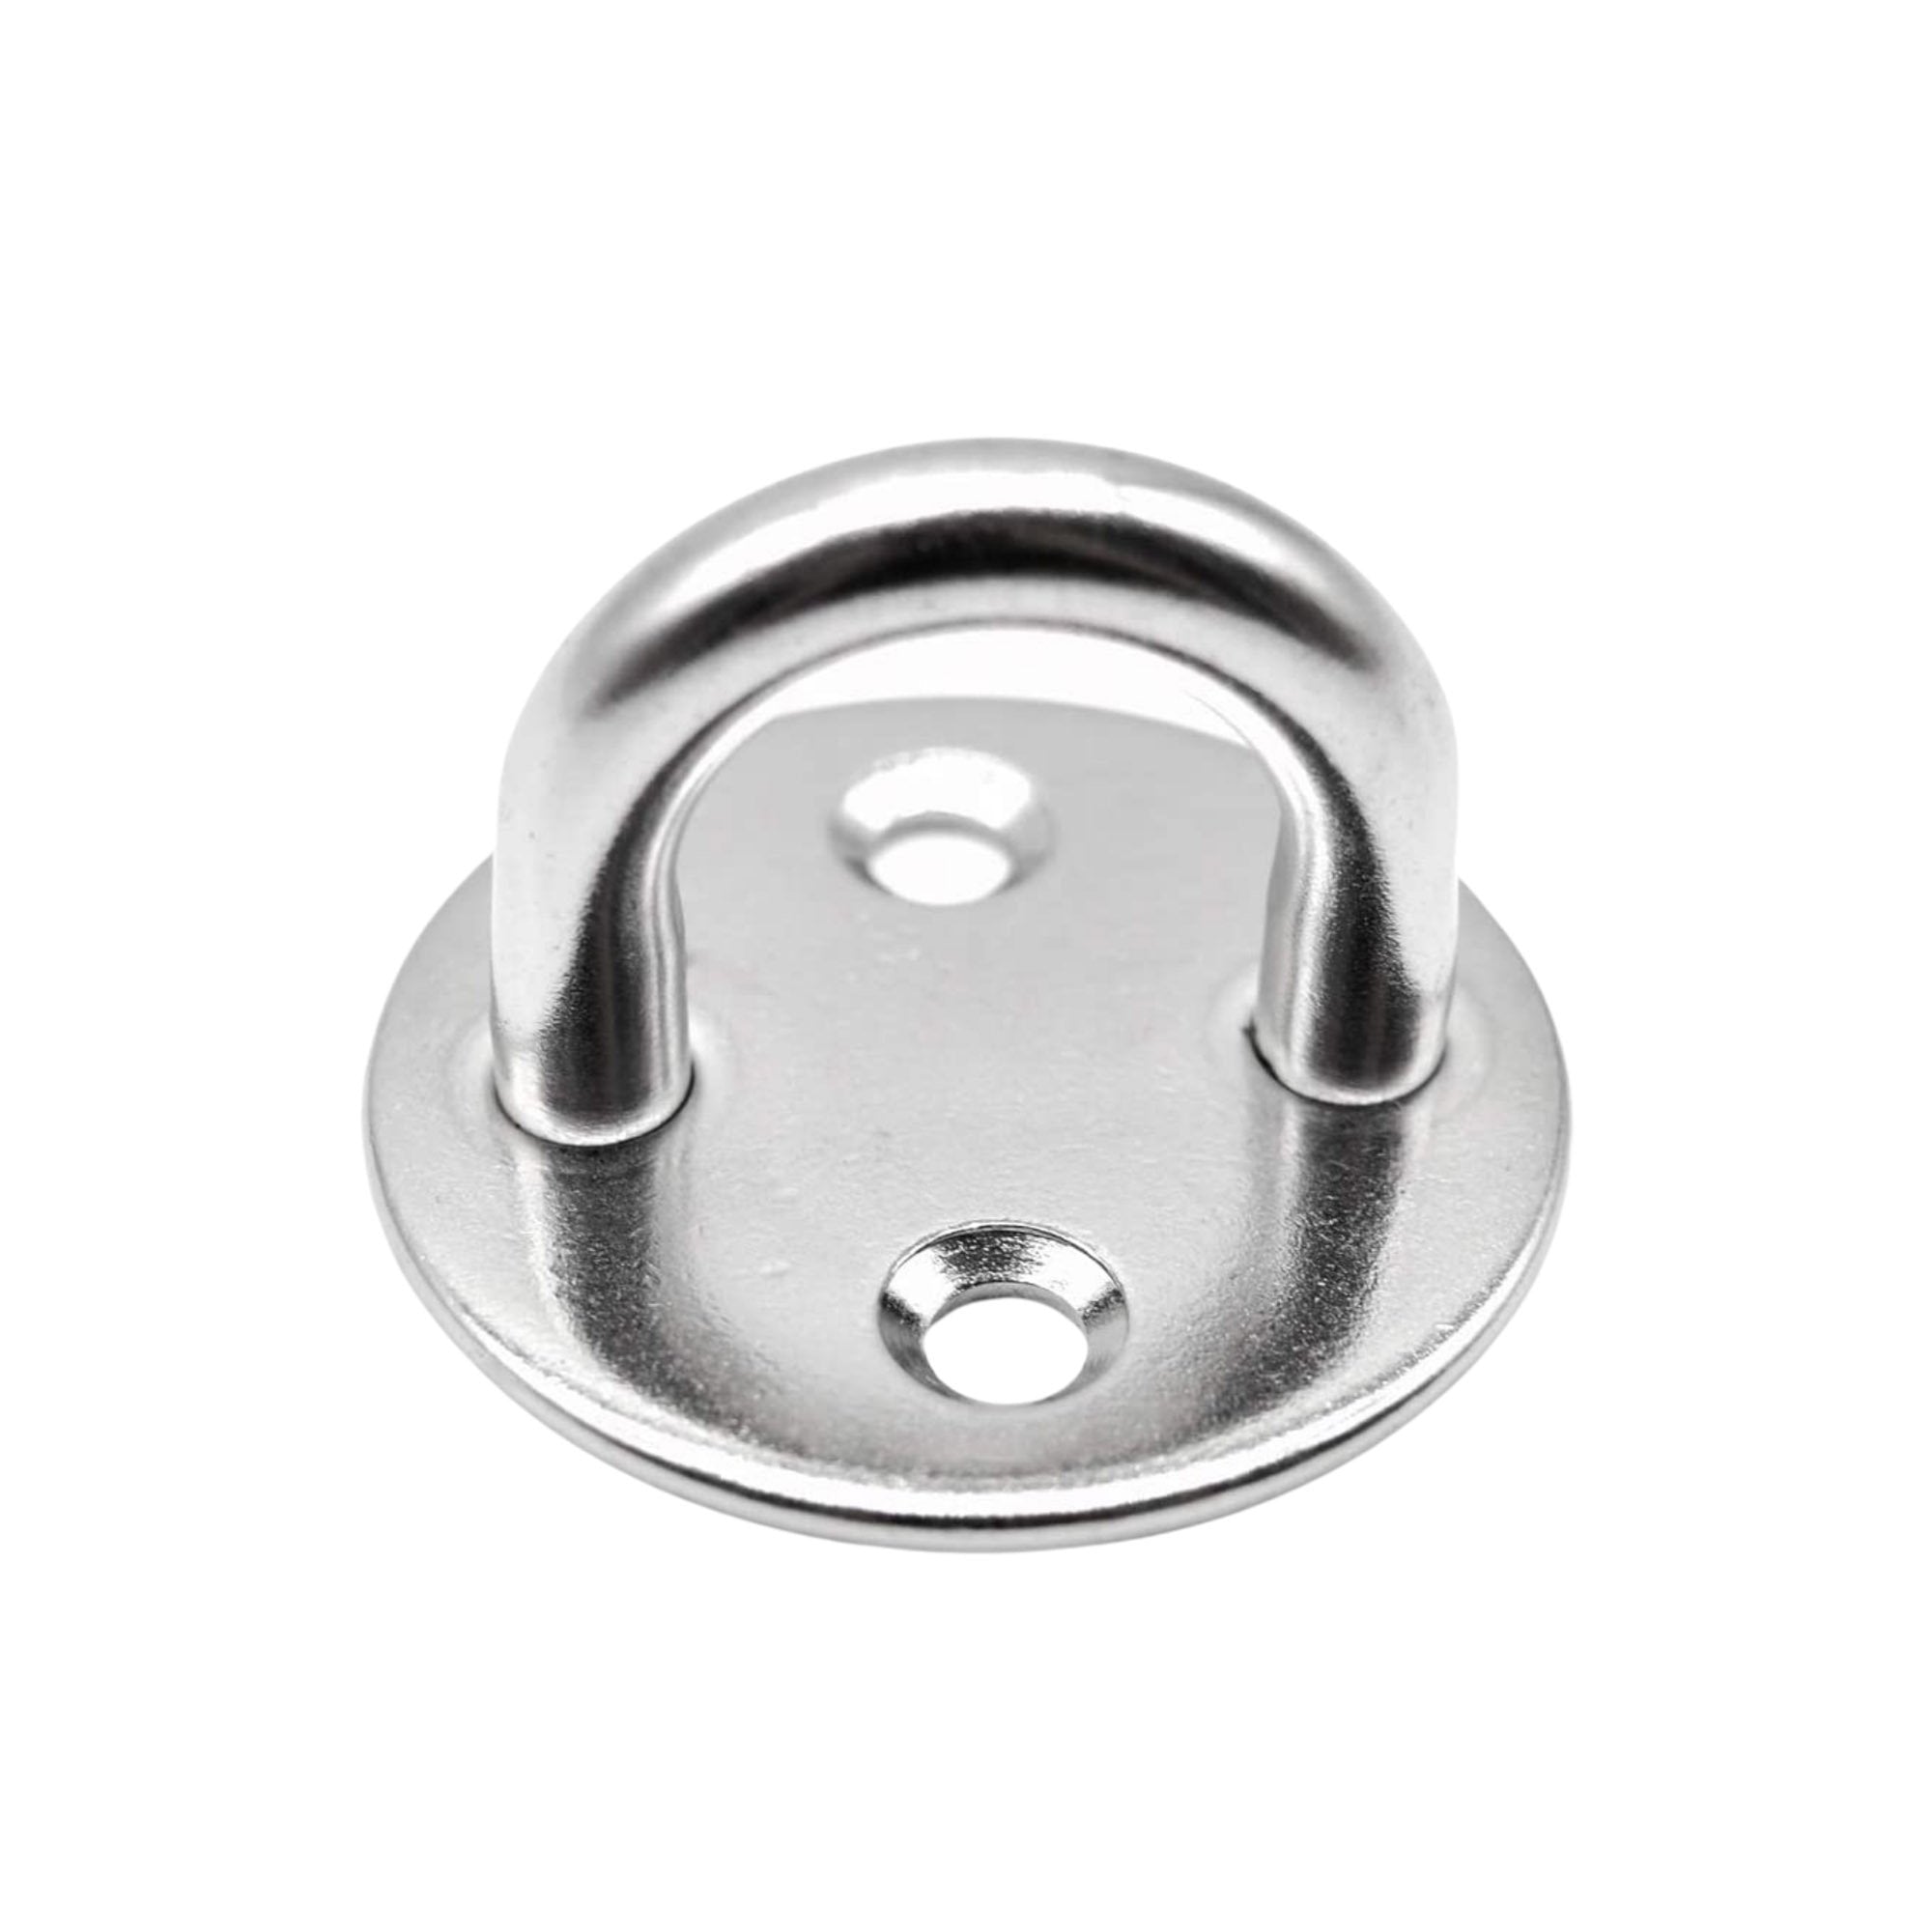 Marine City Marine Stainless-Steel Thick Ring Round Sail Shade Pad Eye Plate Boat Rigging (M)